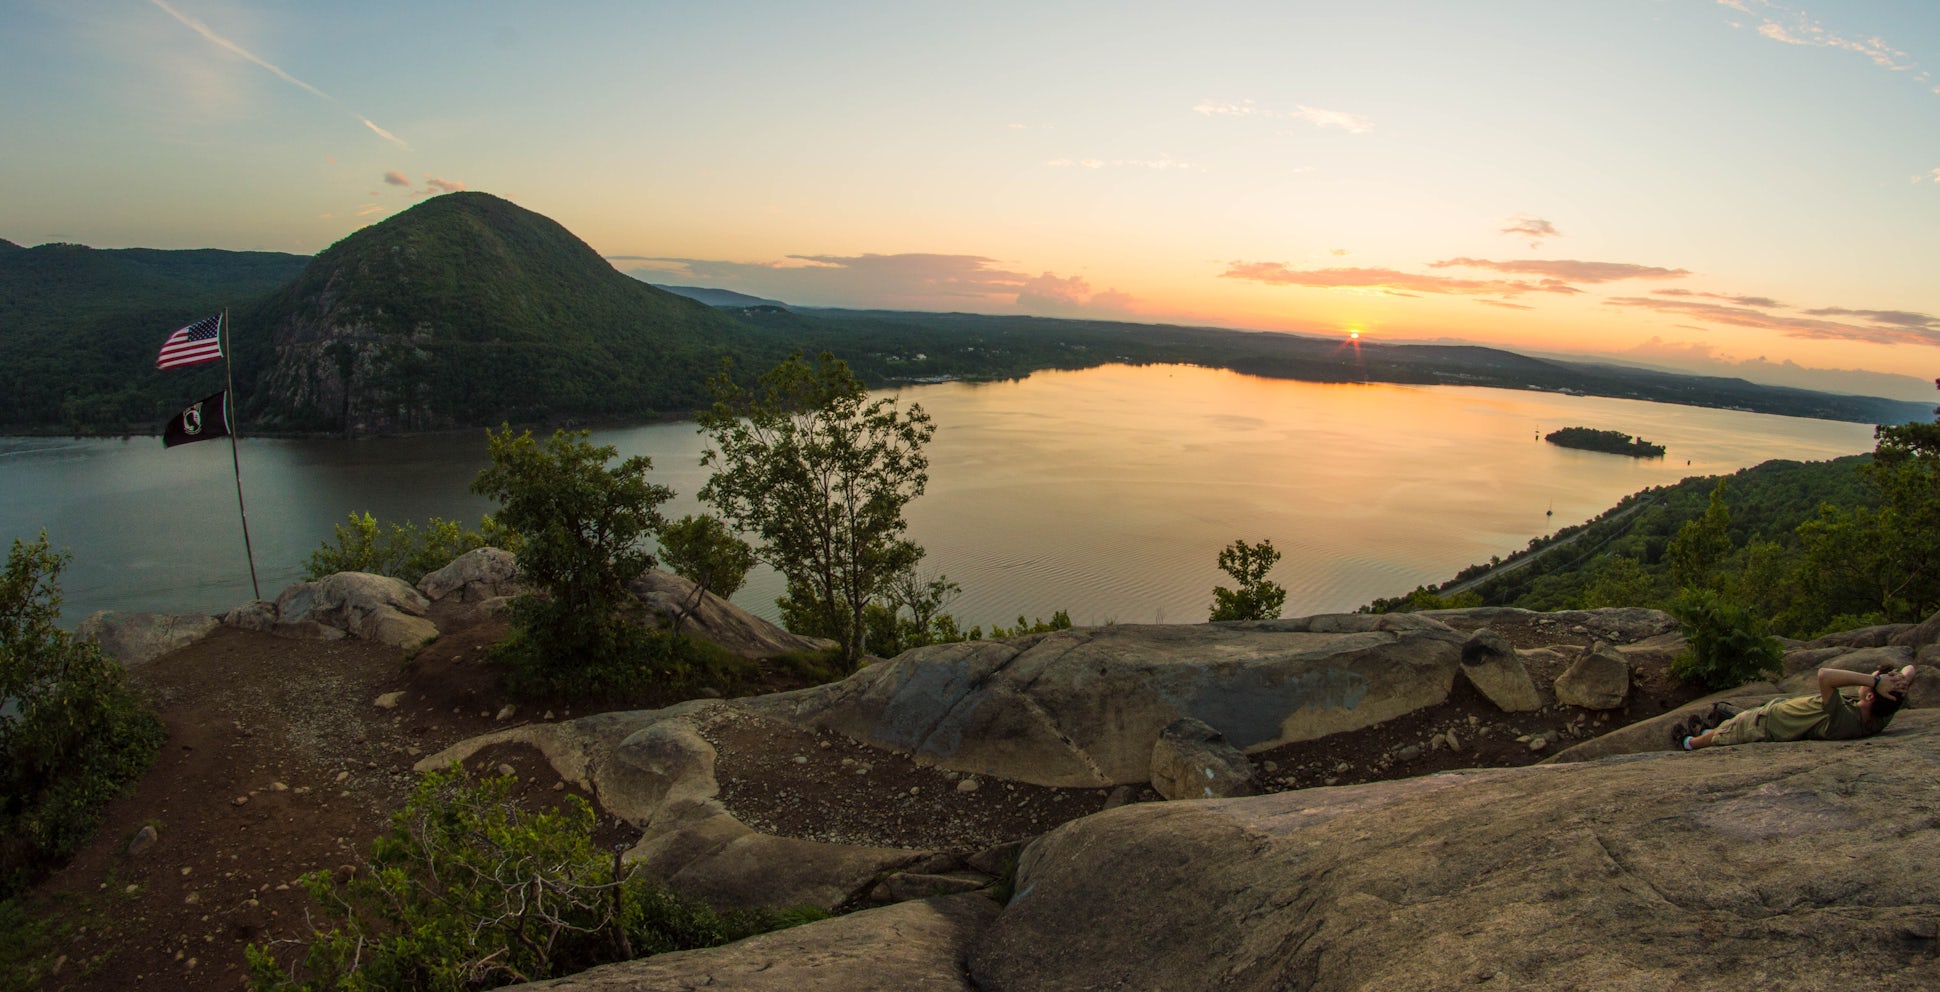 Escape From Nyc The Top 6 Hikes In The Hudson Valley